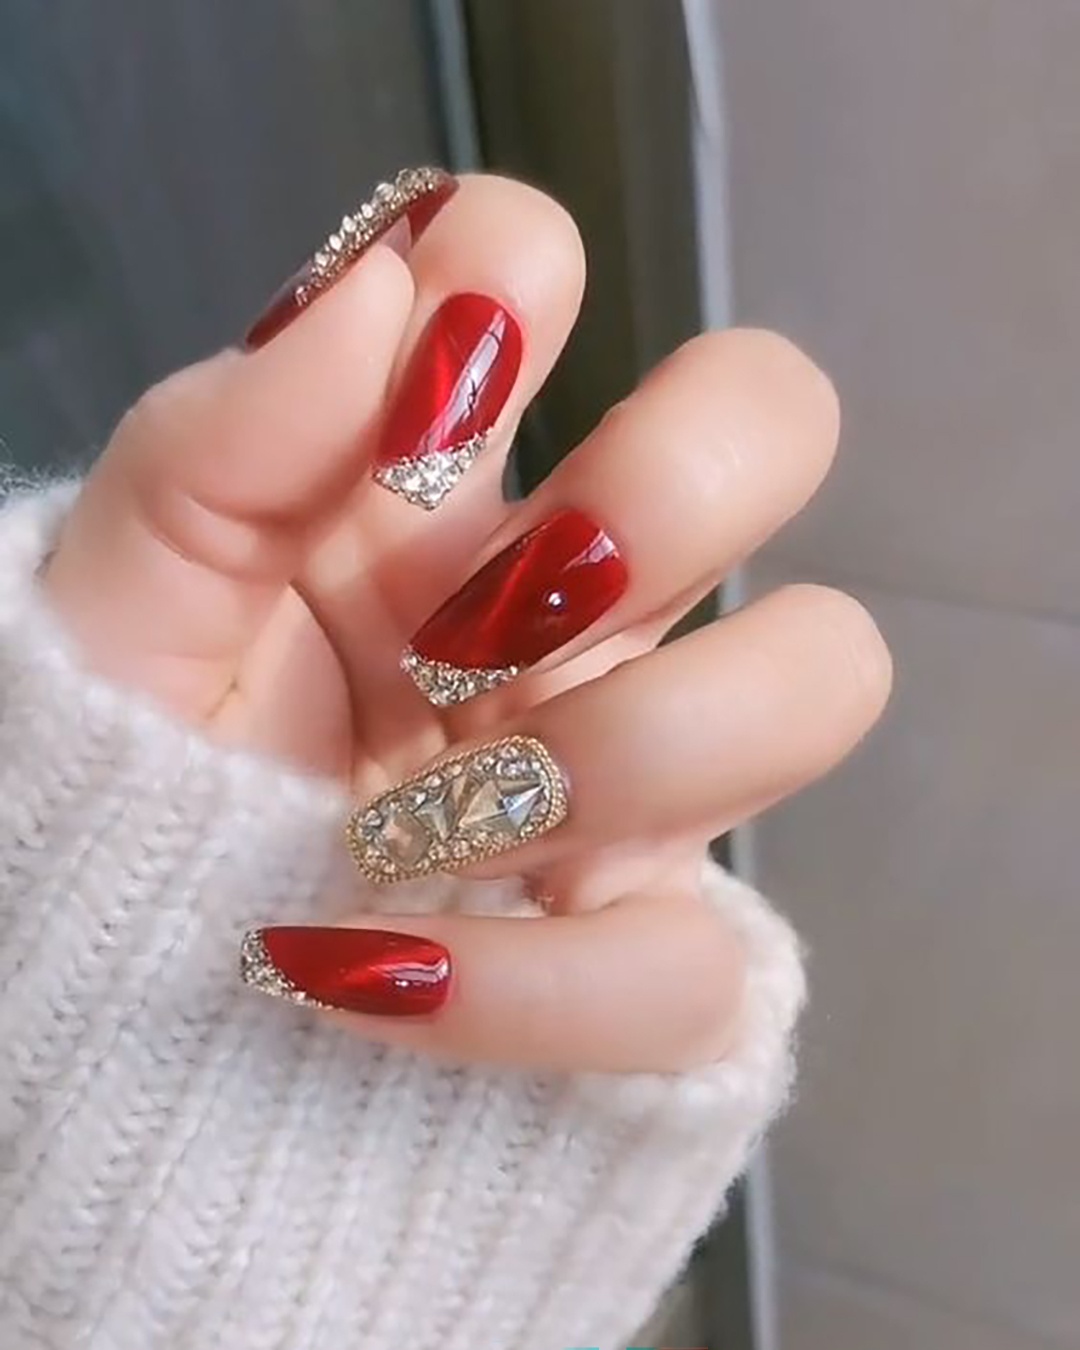 red-nails-with-gem-ideas_(38).jpg